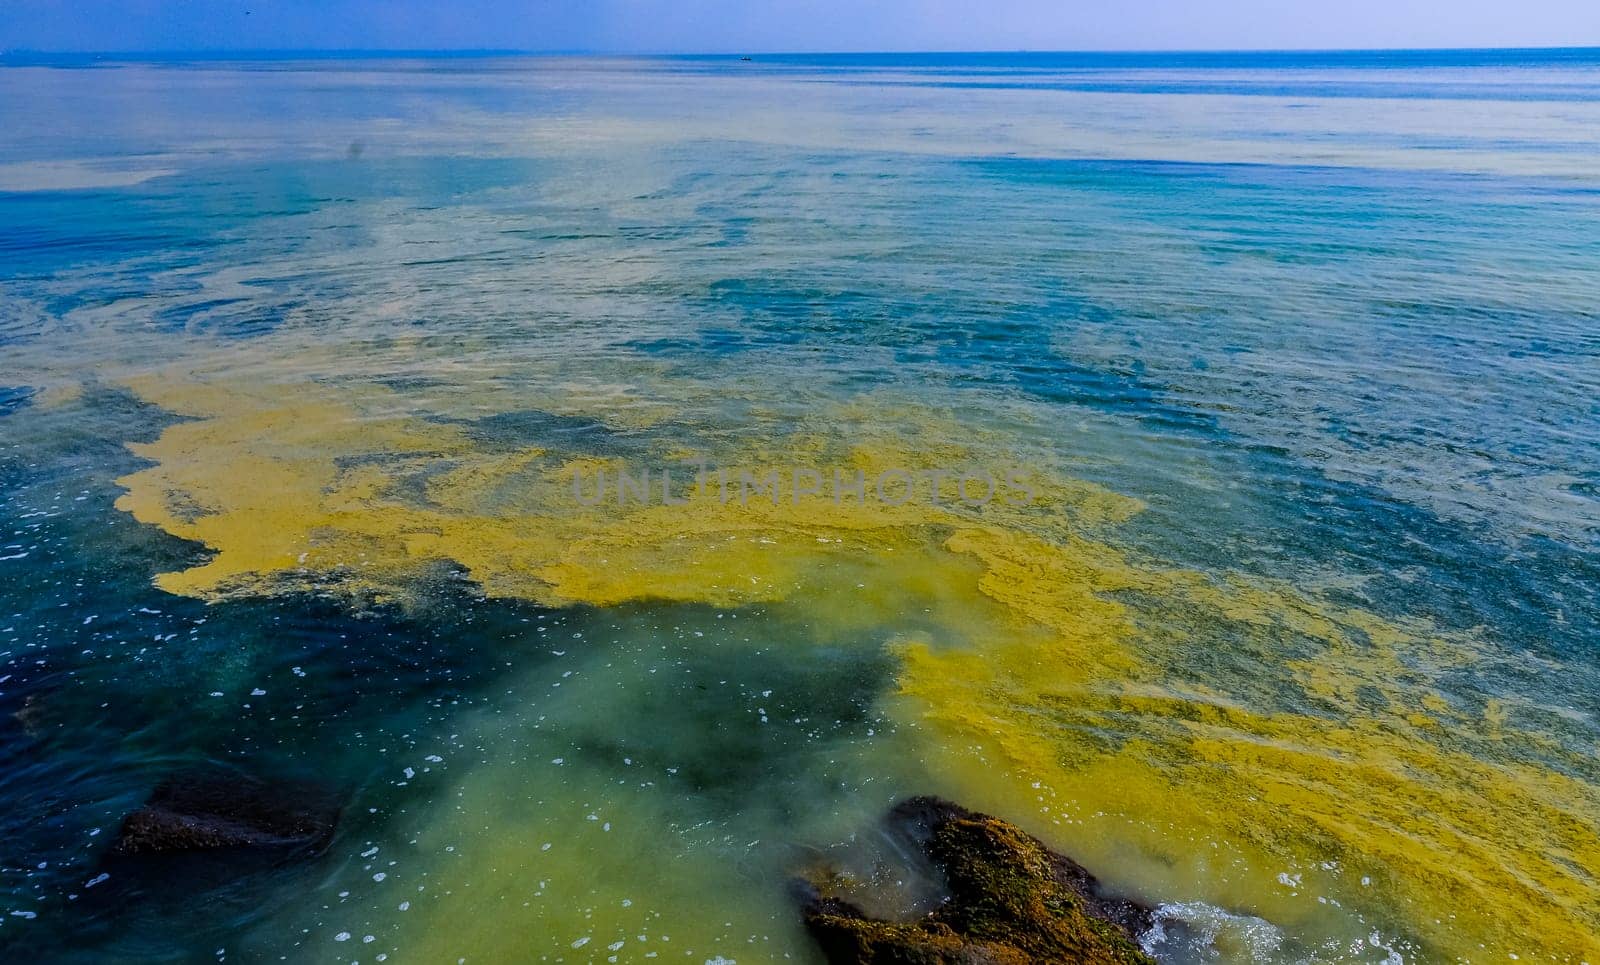 (Nodularia spumigena), ecological disaster, a toxic blue-green algae bloom in the Black Sea by Hydrobiolog